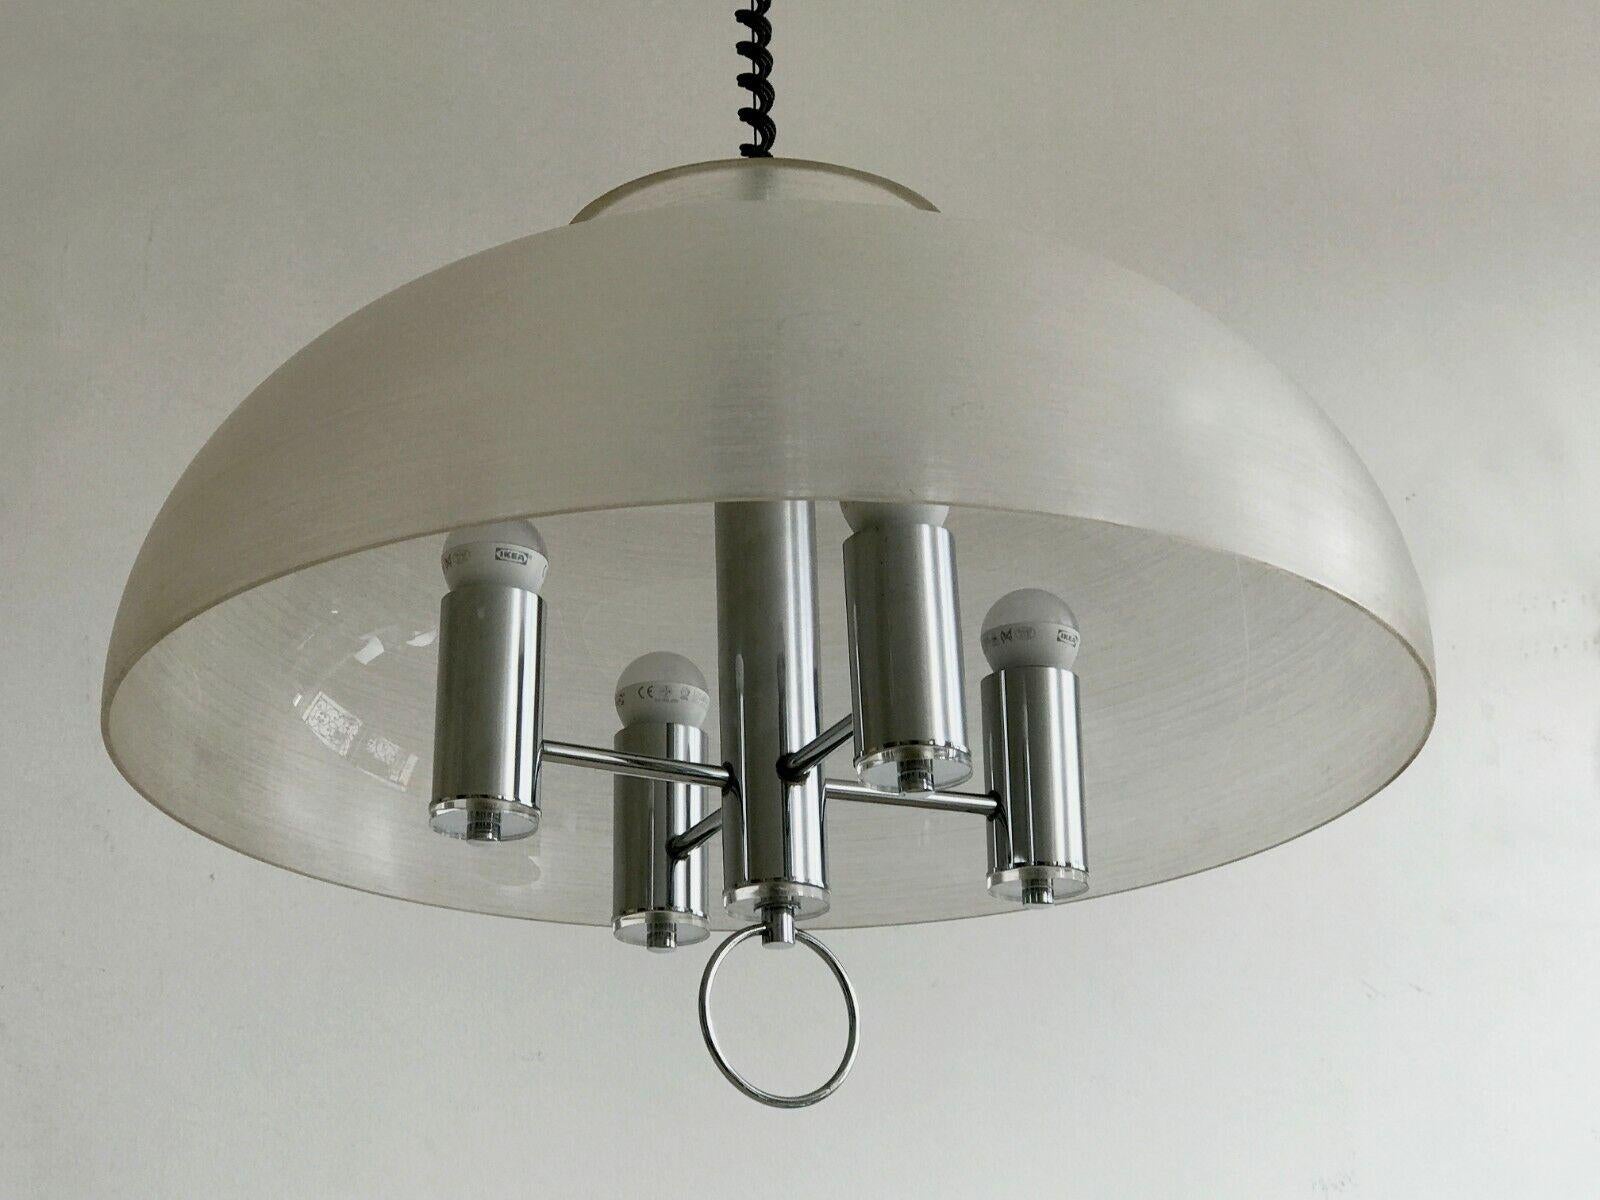 A Large Lucite SPACE-AGE Ceiling Fixture LAMP by GUZZINI,  Italy 1960 For Sale 1